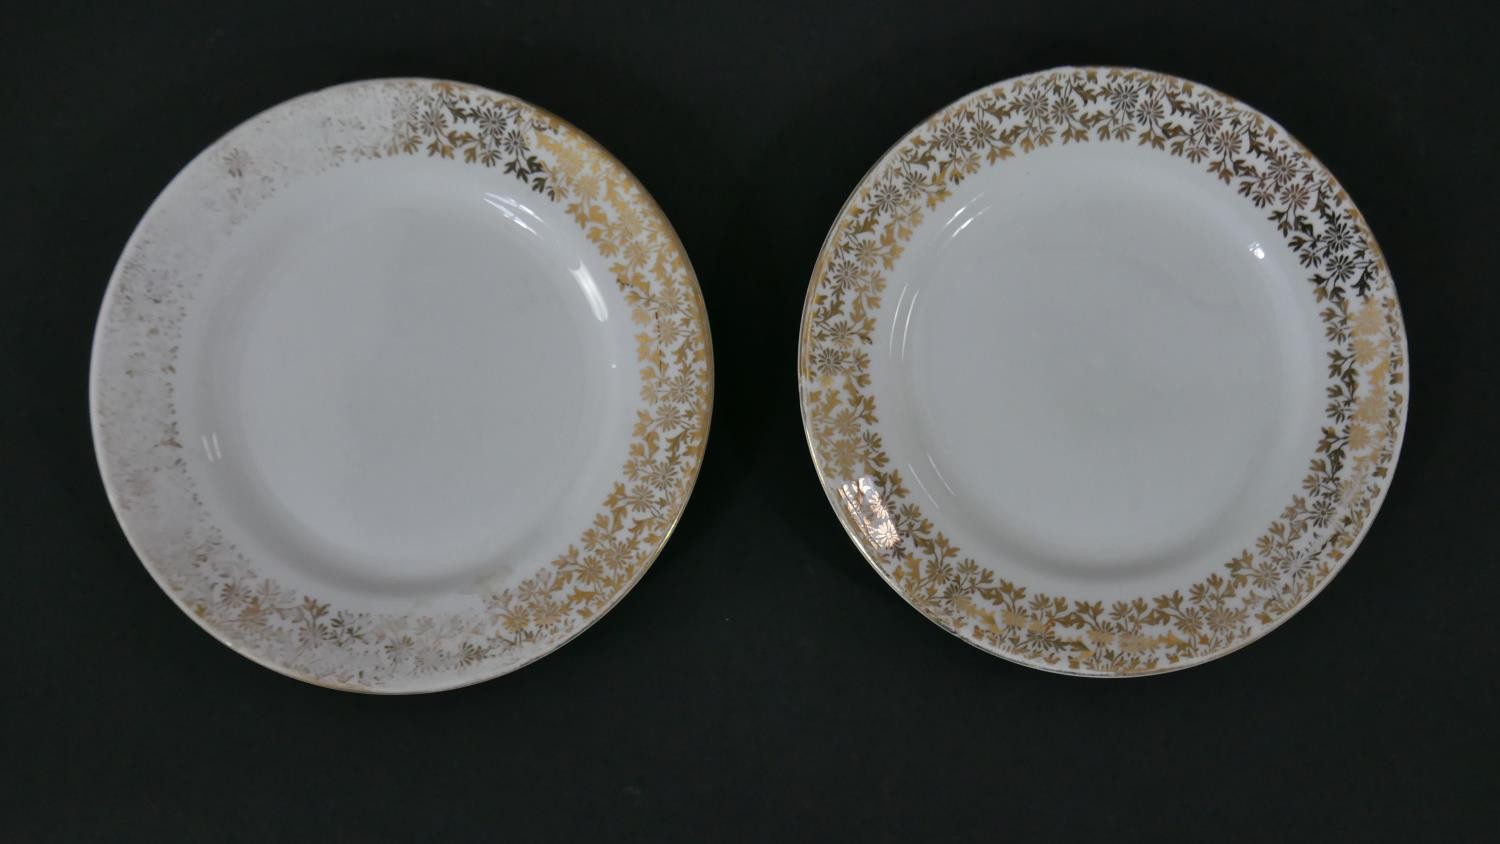 An Adderley gilded floral design fine bone china part six person tea set. Six tea cups and - Image 5 of 8